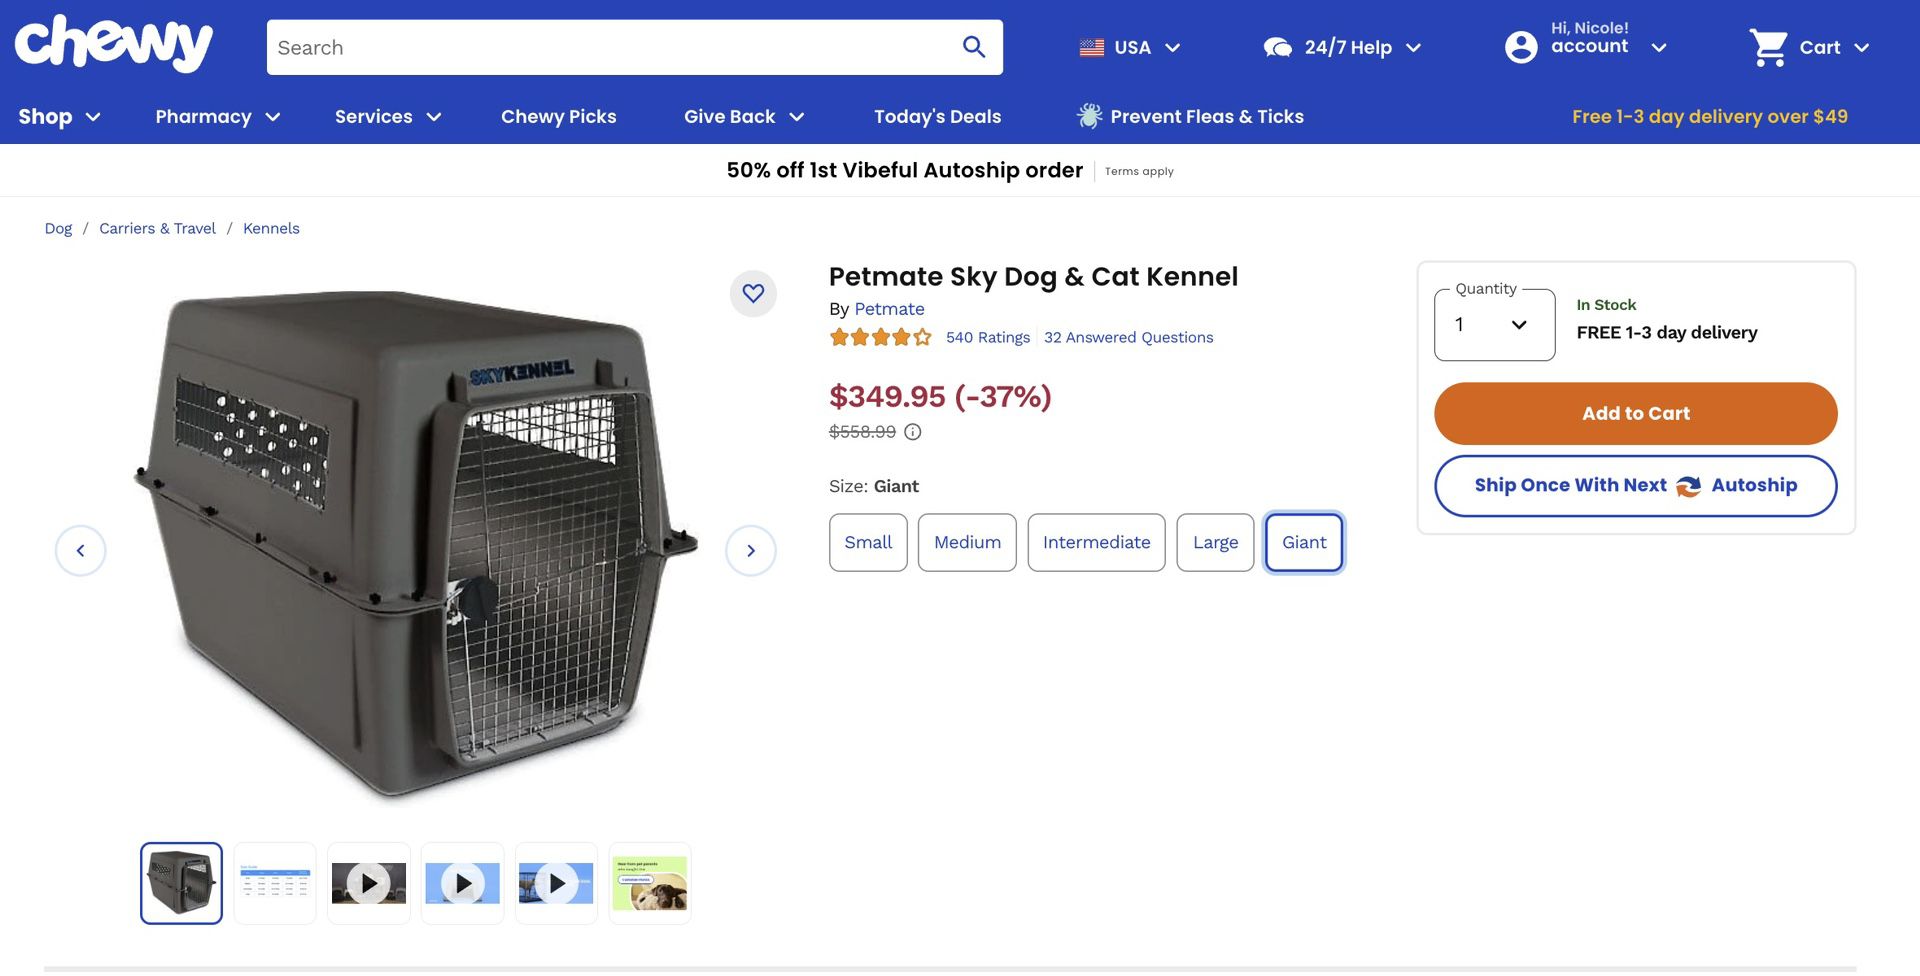 GIANT SkyKennel crate, BRAND NEW Dog Crate, Airline Approved 